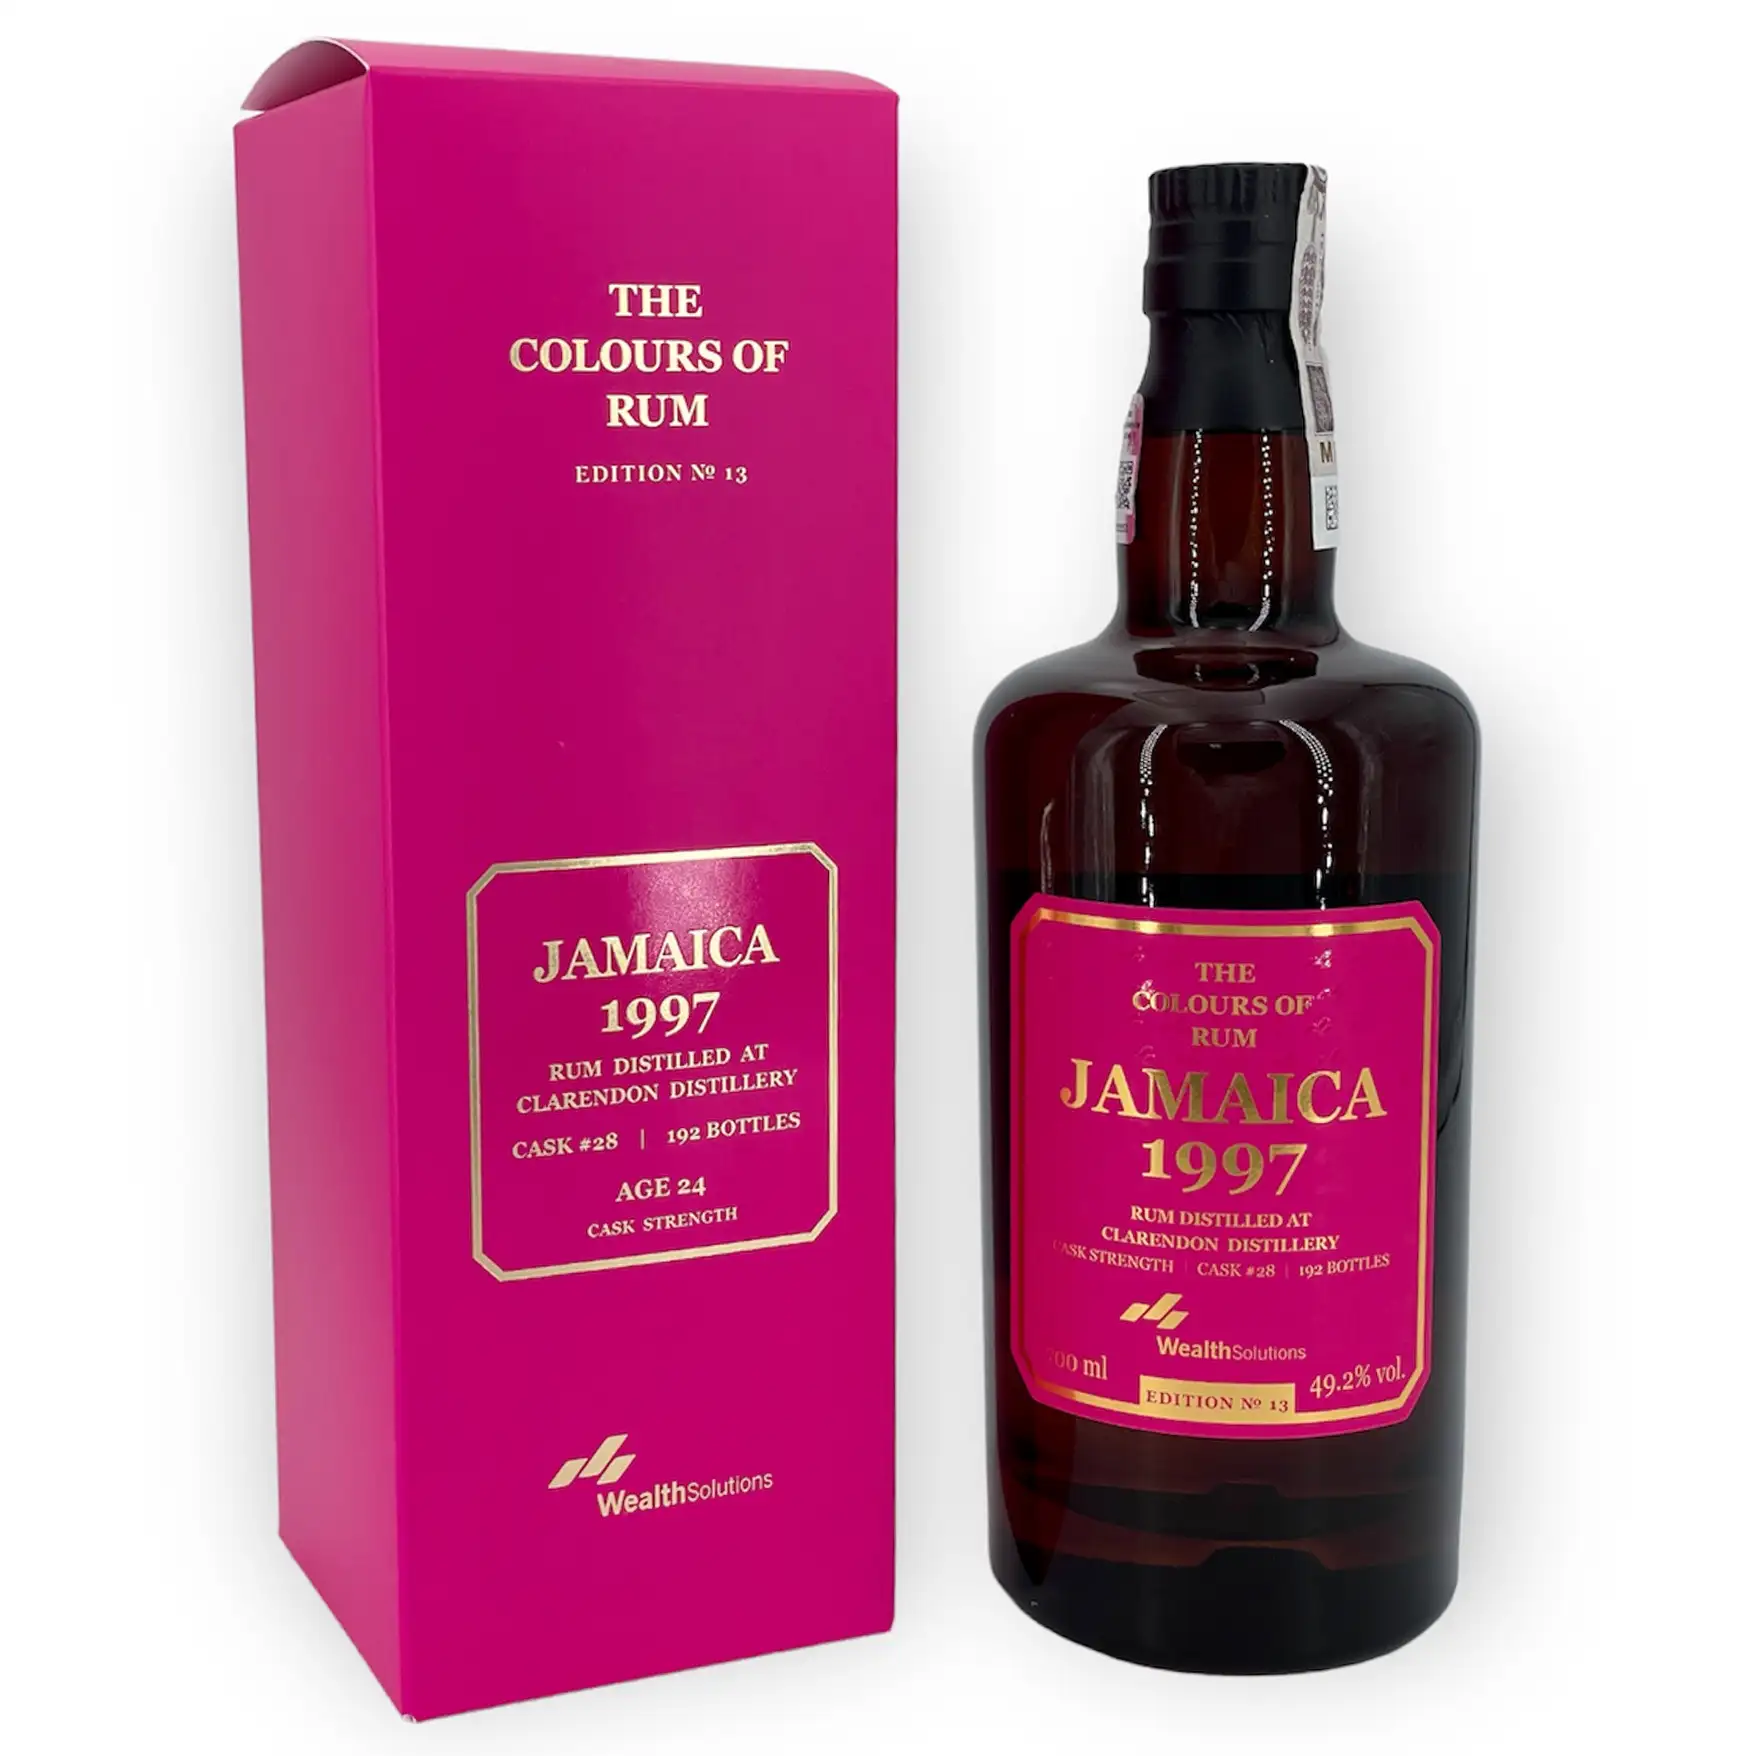 Image of the front of the bottle of the rum Jamaica No. 13